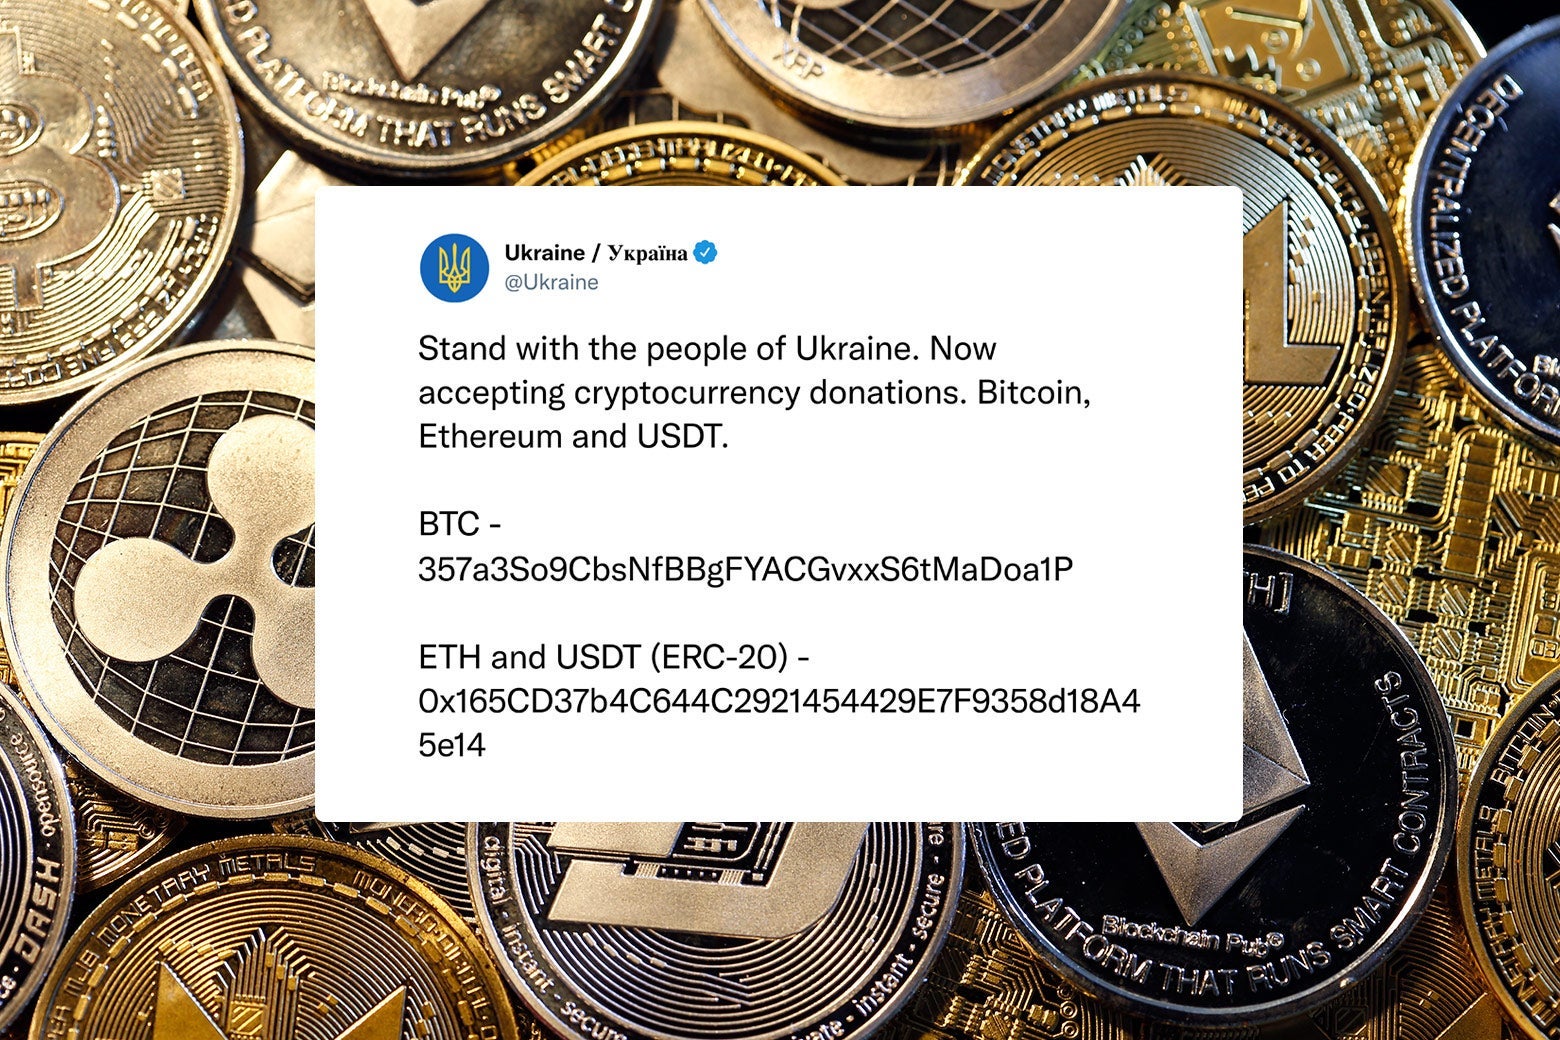 A tweet from the Ukraine asking for cryptocurreny donations on top of a backdrop of crypto coins.